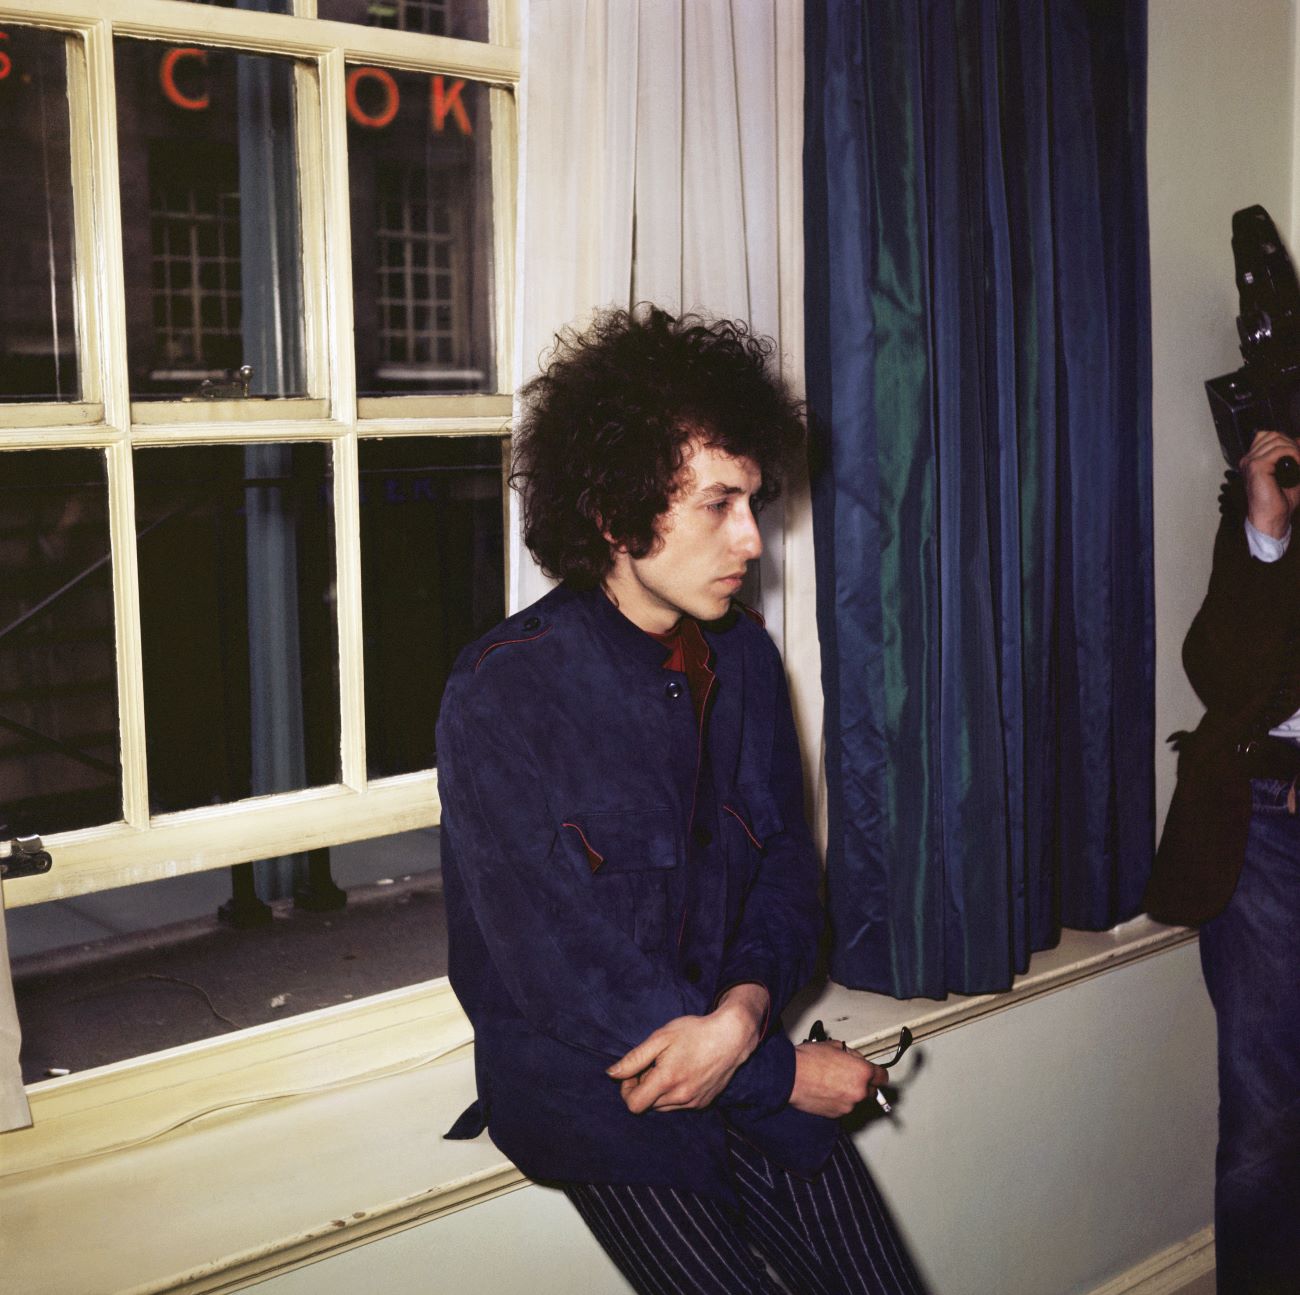 Bob Dylan leans on a window sill with a cigarette.